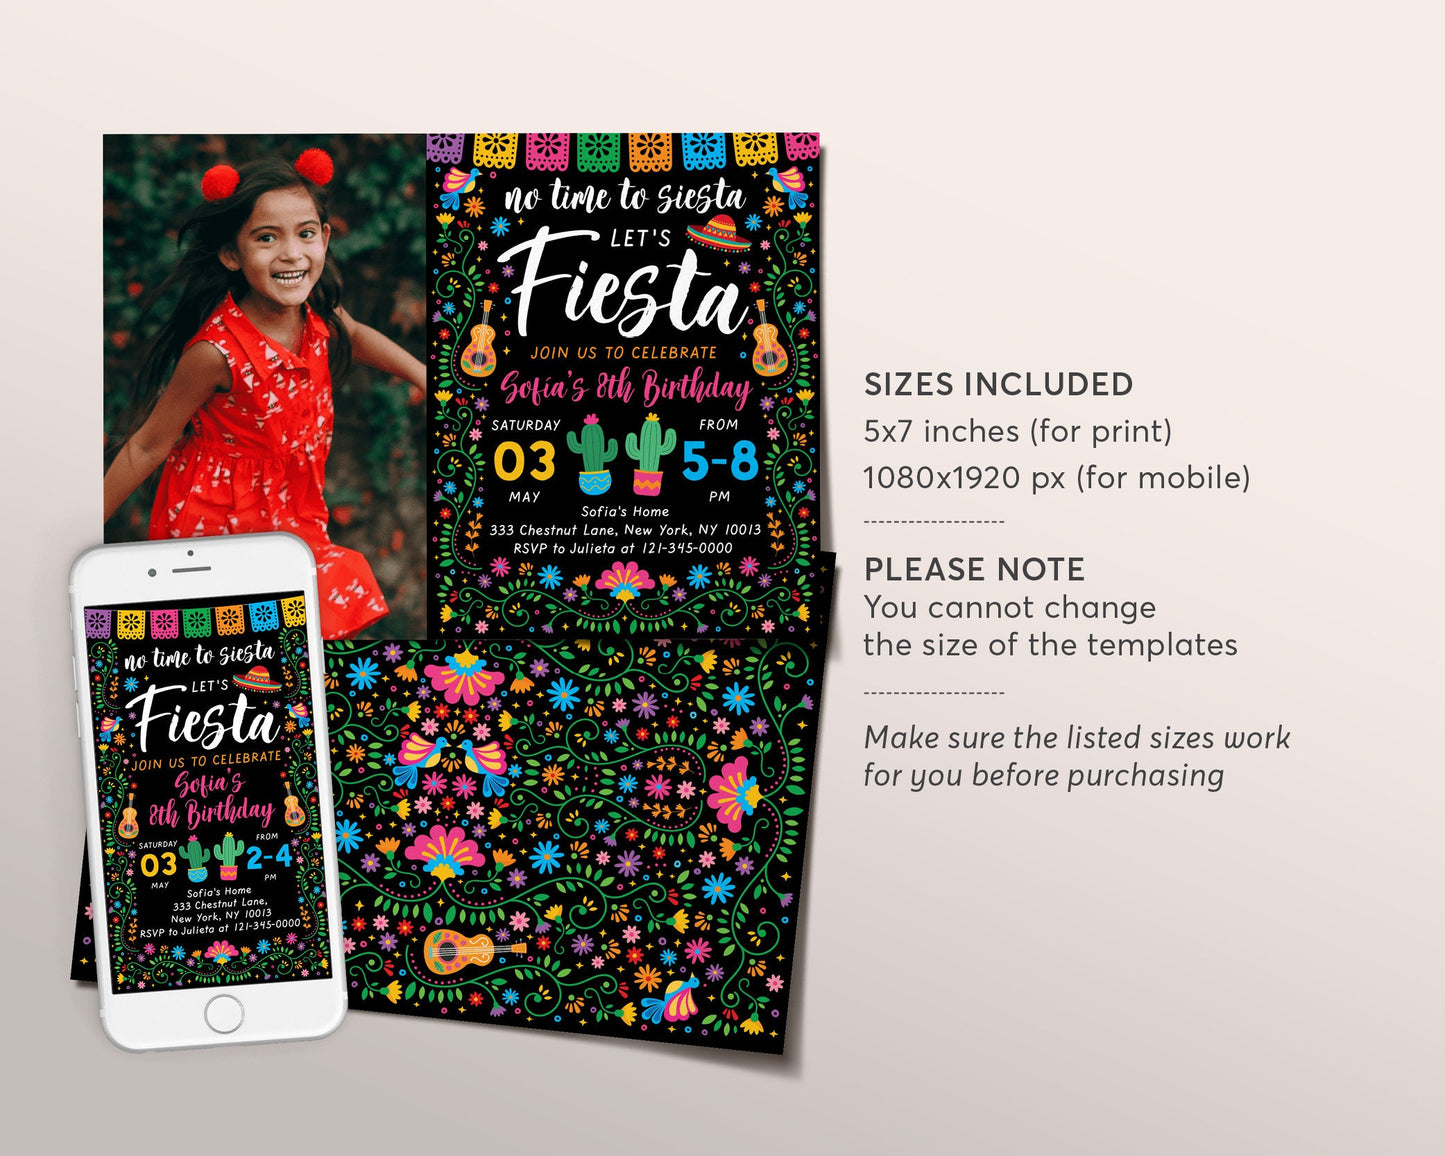 Fiesta Birthday Party With Photo Invitation Editable Template, Mexican Theme Girl Party Evite, No Time To Siesta Cinco De Mayo Cactus